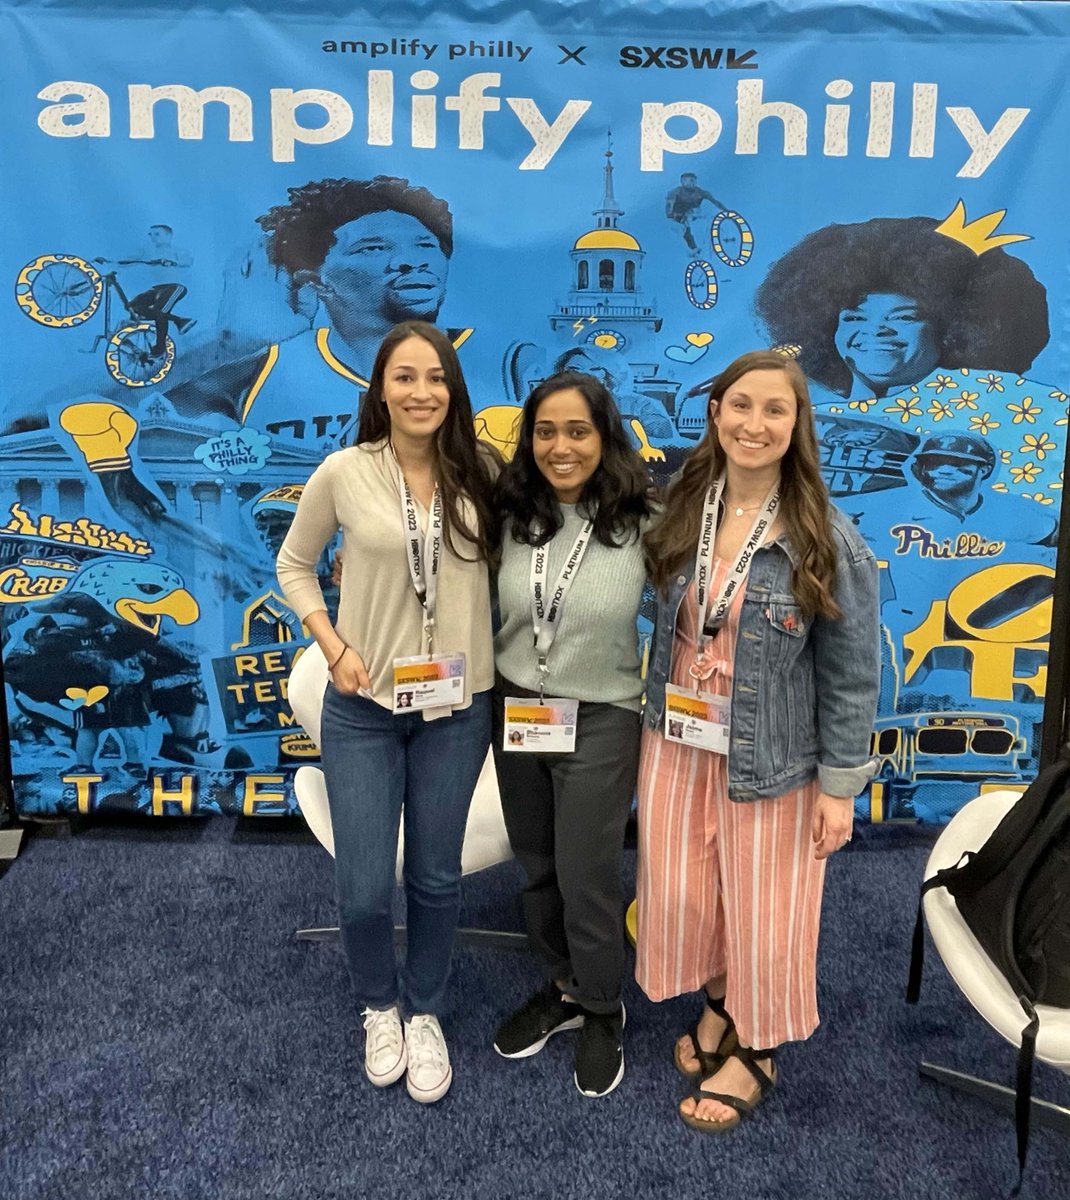 The @sxsw Conference is currently underway! The Pennovation Works team is thrilled to attend again this year & are enjoying learning about innovation initiatives. @PCIventures's own Mike Poisel, also moderated the @AmplifyPhilly Philly Made: Entrepreneur Roundtable discussion.